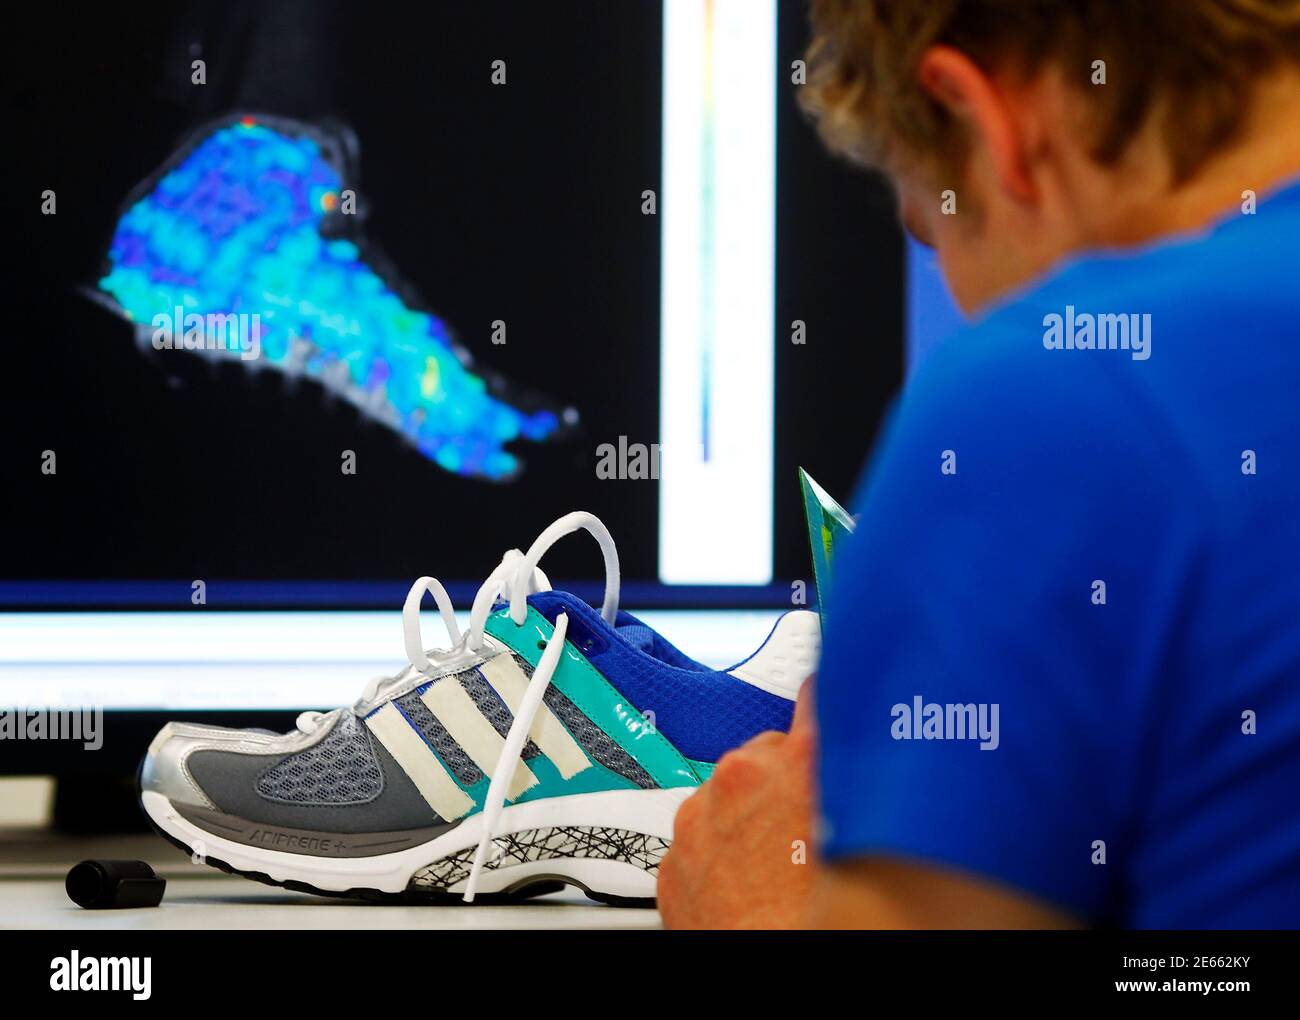 An engineer adjusts test marks on an Adidas running shoe at the Adidas  innovation laboratory in Herzogenaurach May 7, 2012. U.S. market leader  Nike and German rival Adidas are locked in their